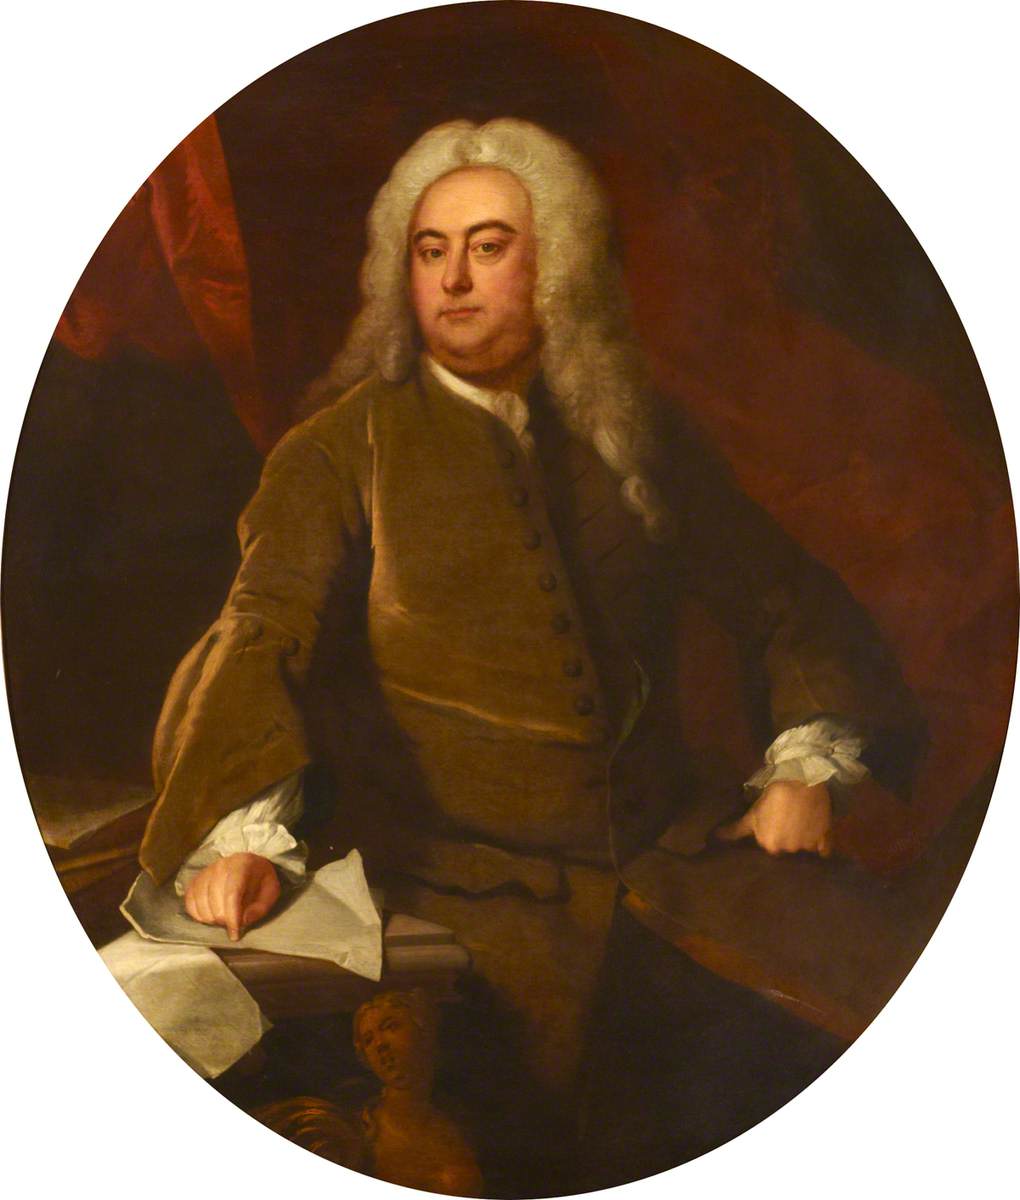 Three-Quarter-Length Portrait of a Seated Gentleman Wearing a Wig and Brown Coat